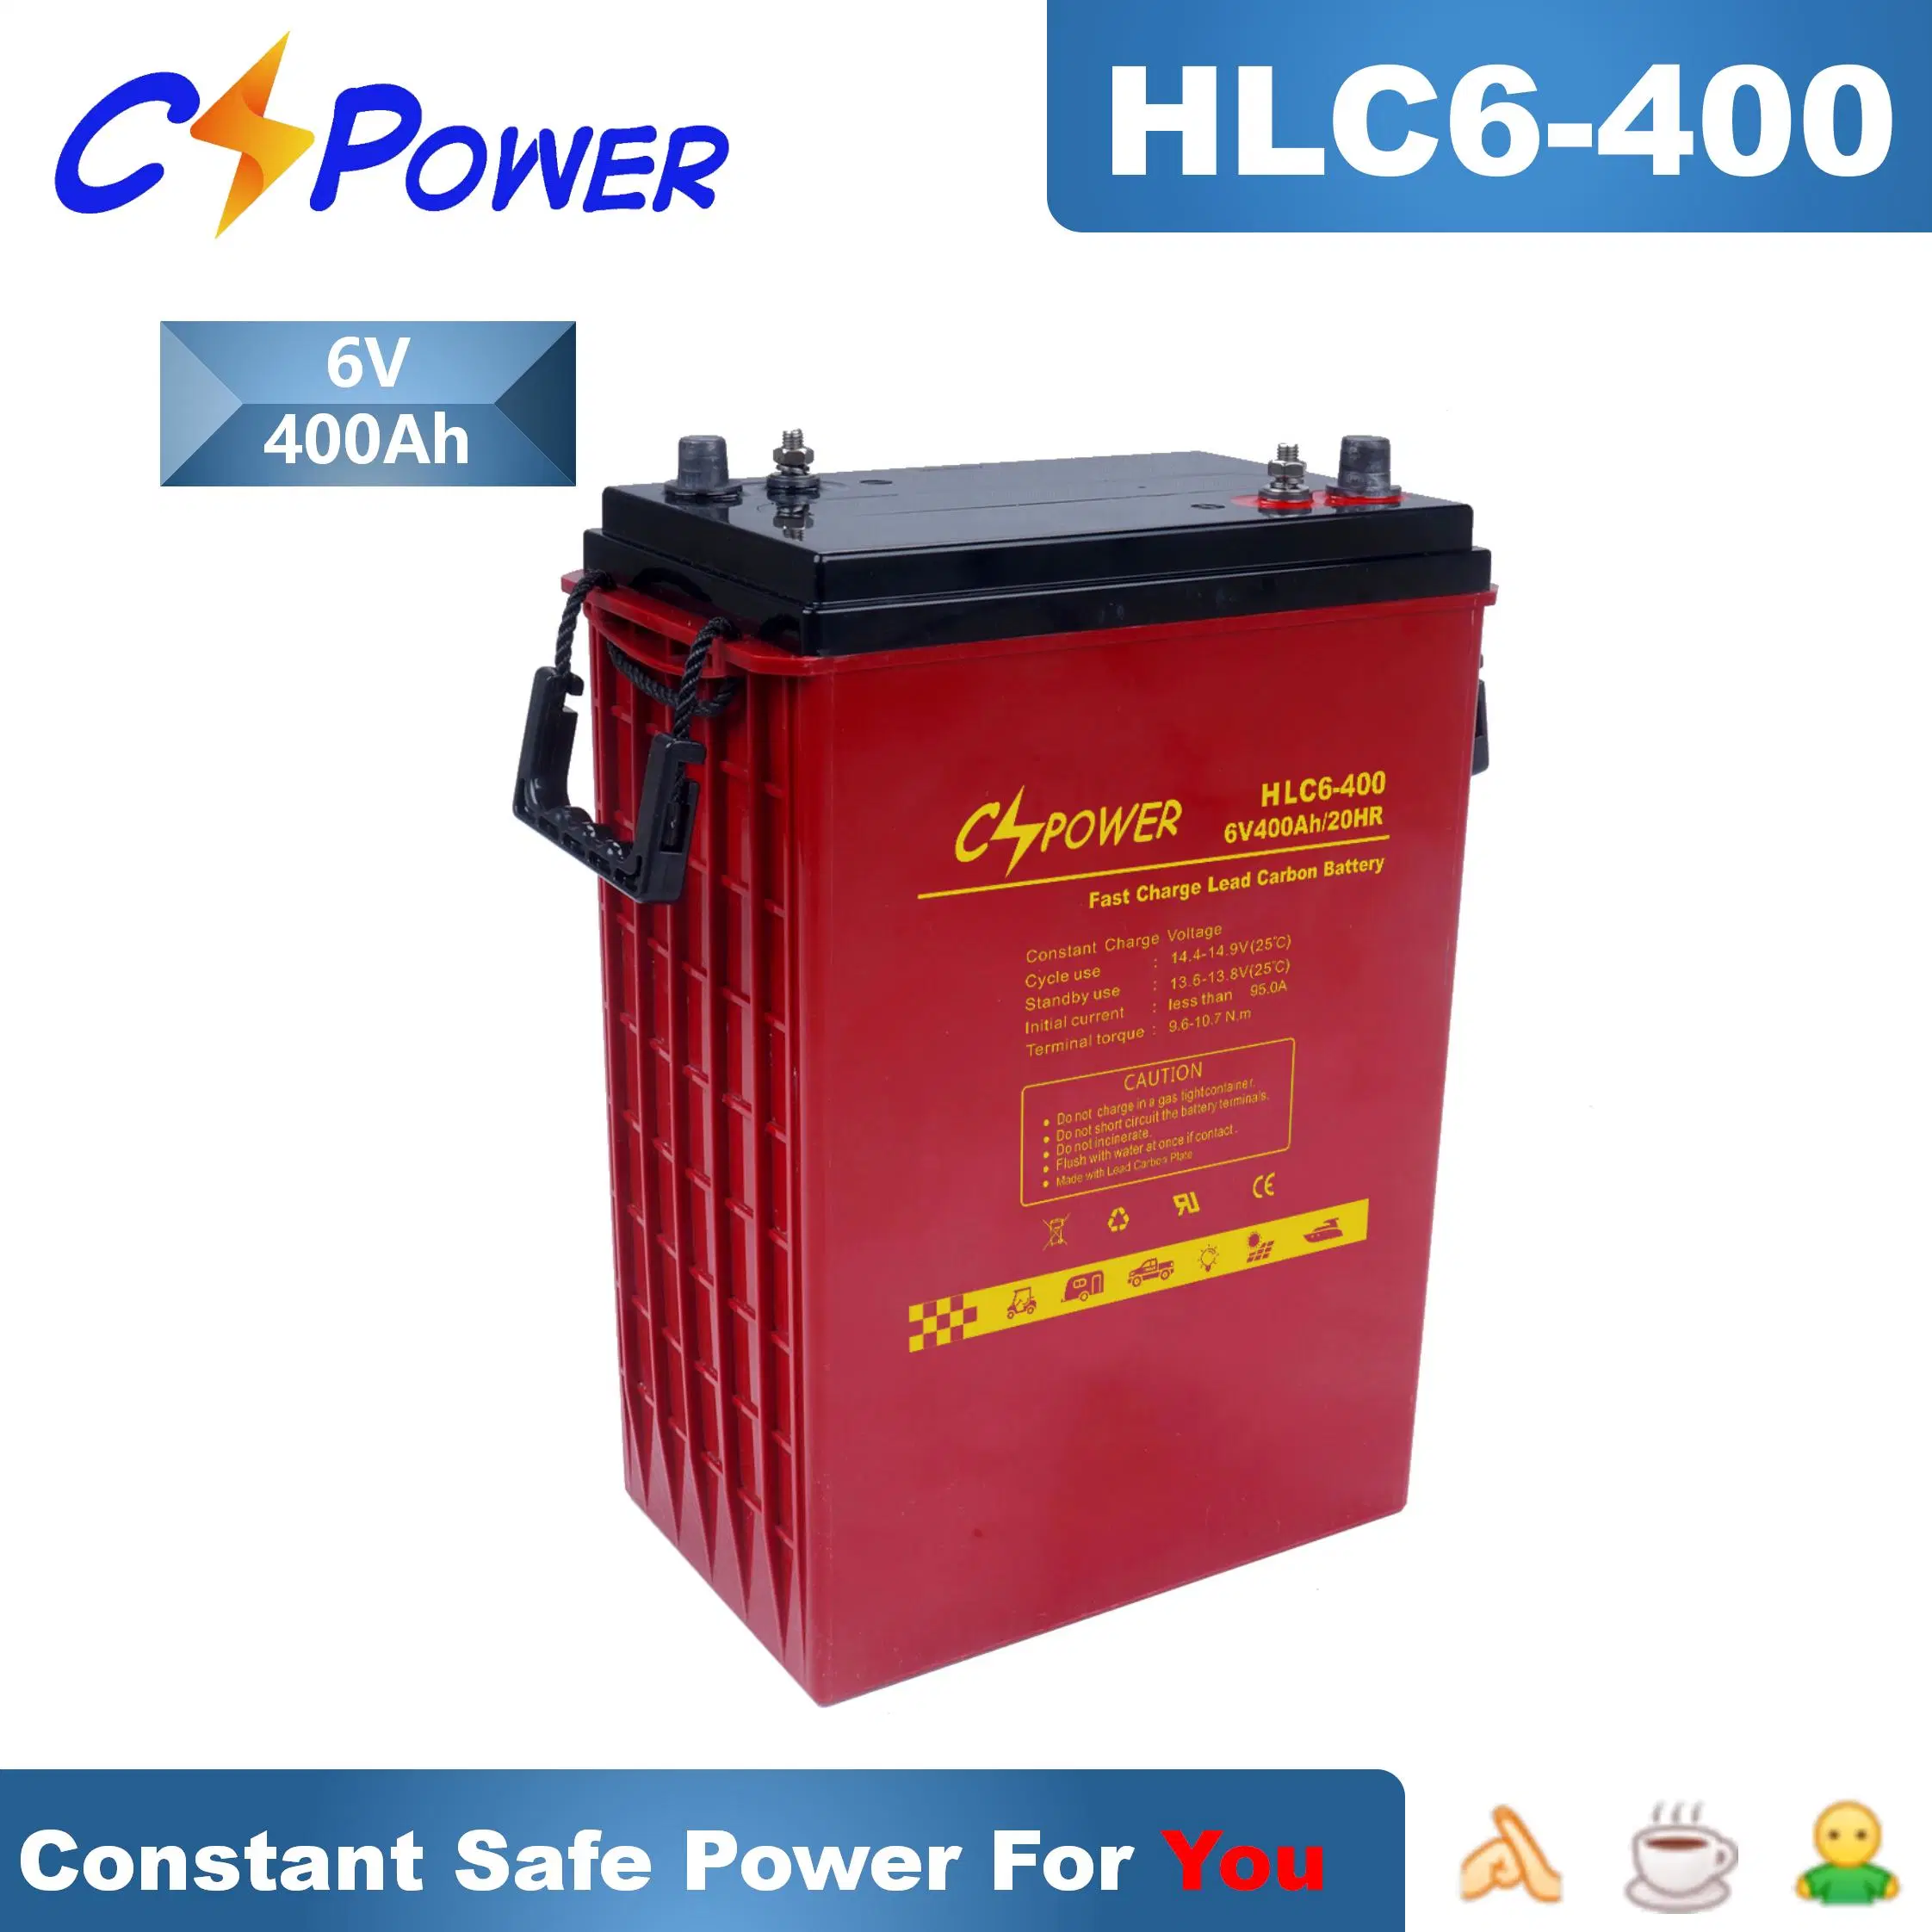 Cspower Battery Fast Charge Long Life Lead Carbon Battery Hlc 6-400